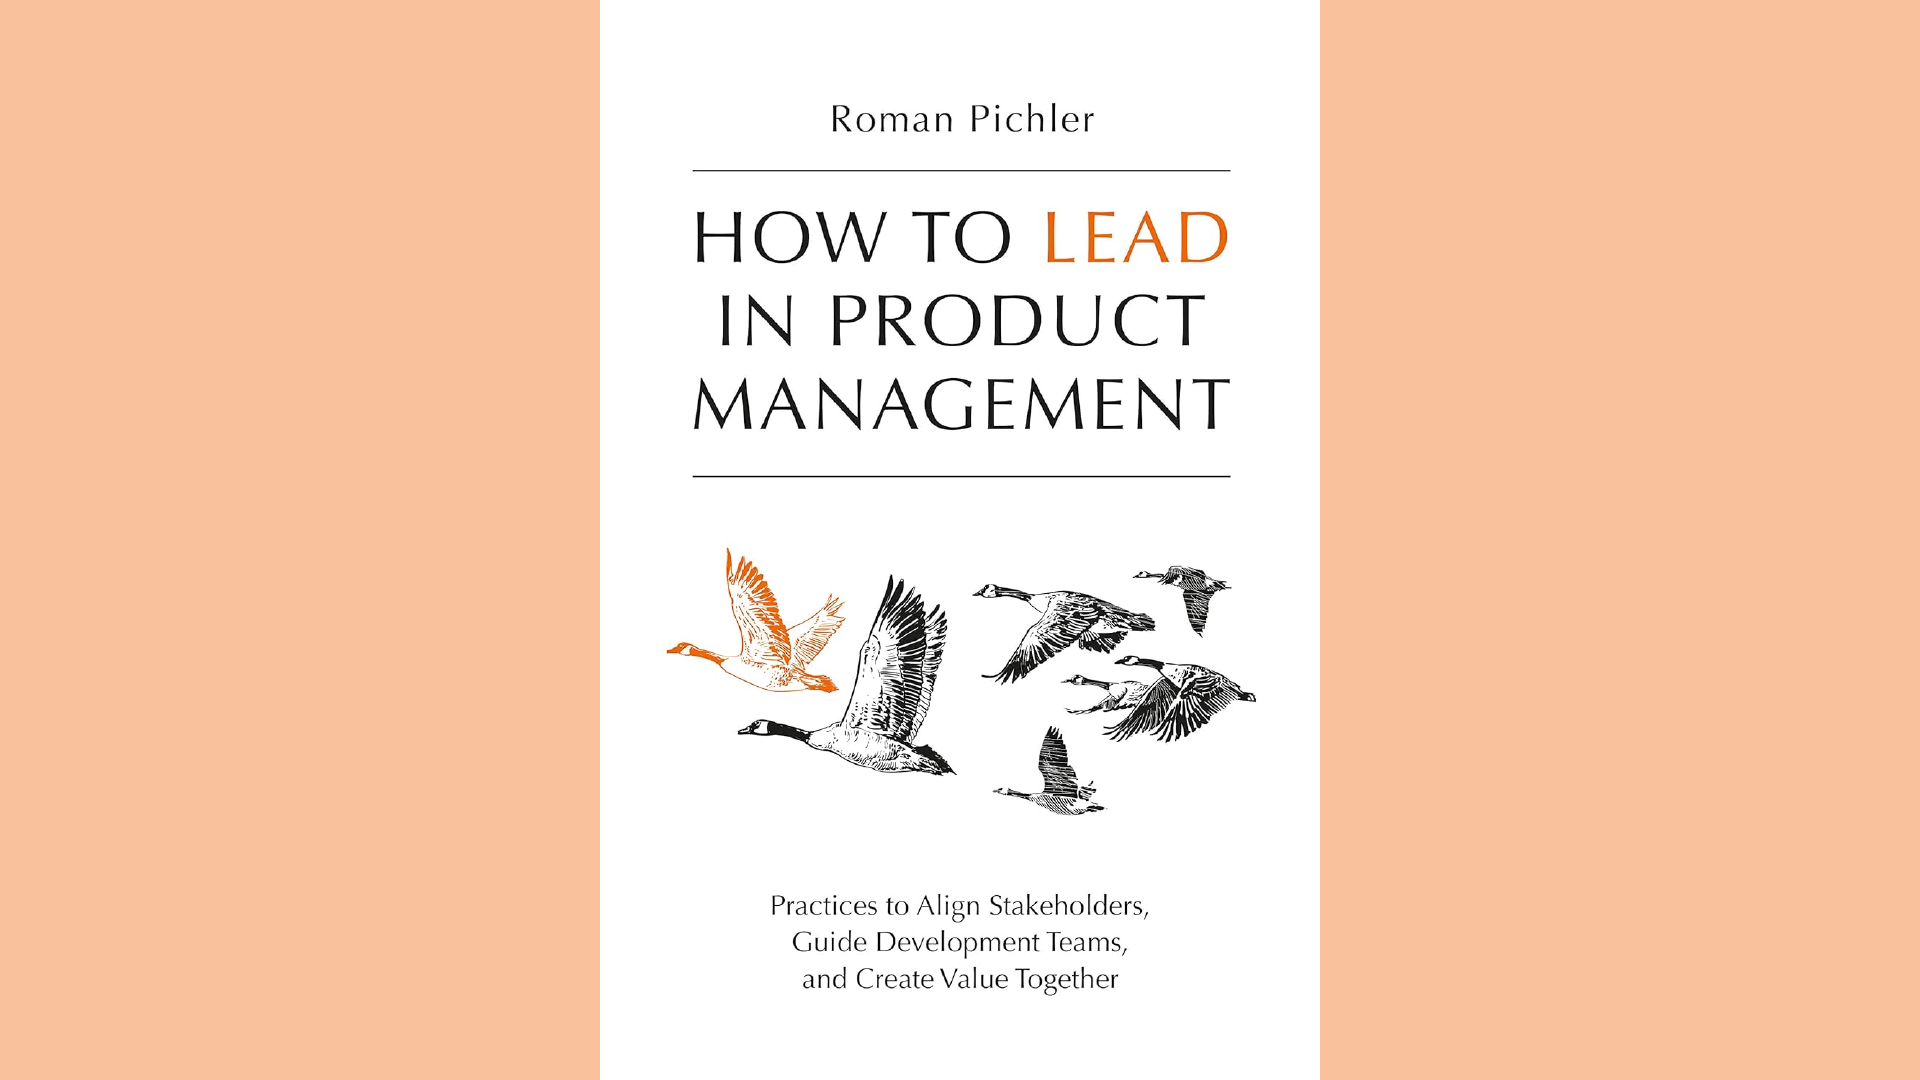 Summary: How to Lead in Product Management by Roman Pichler